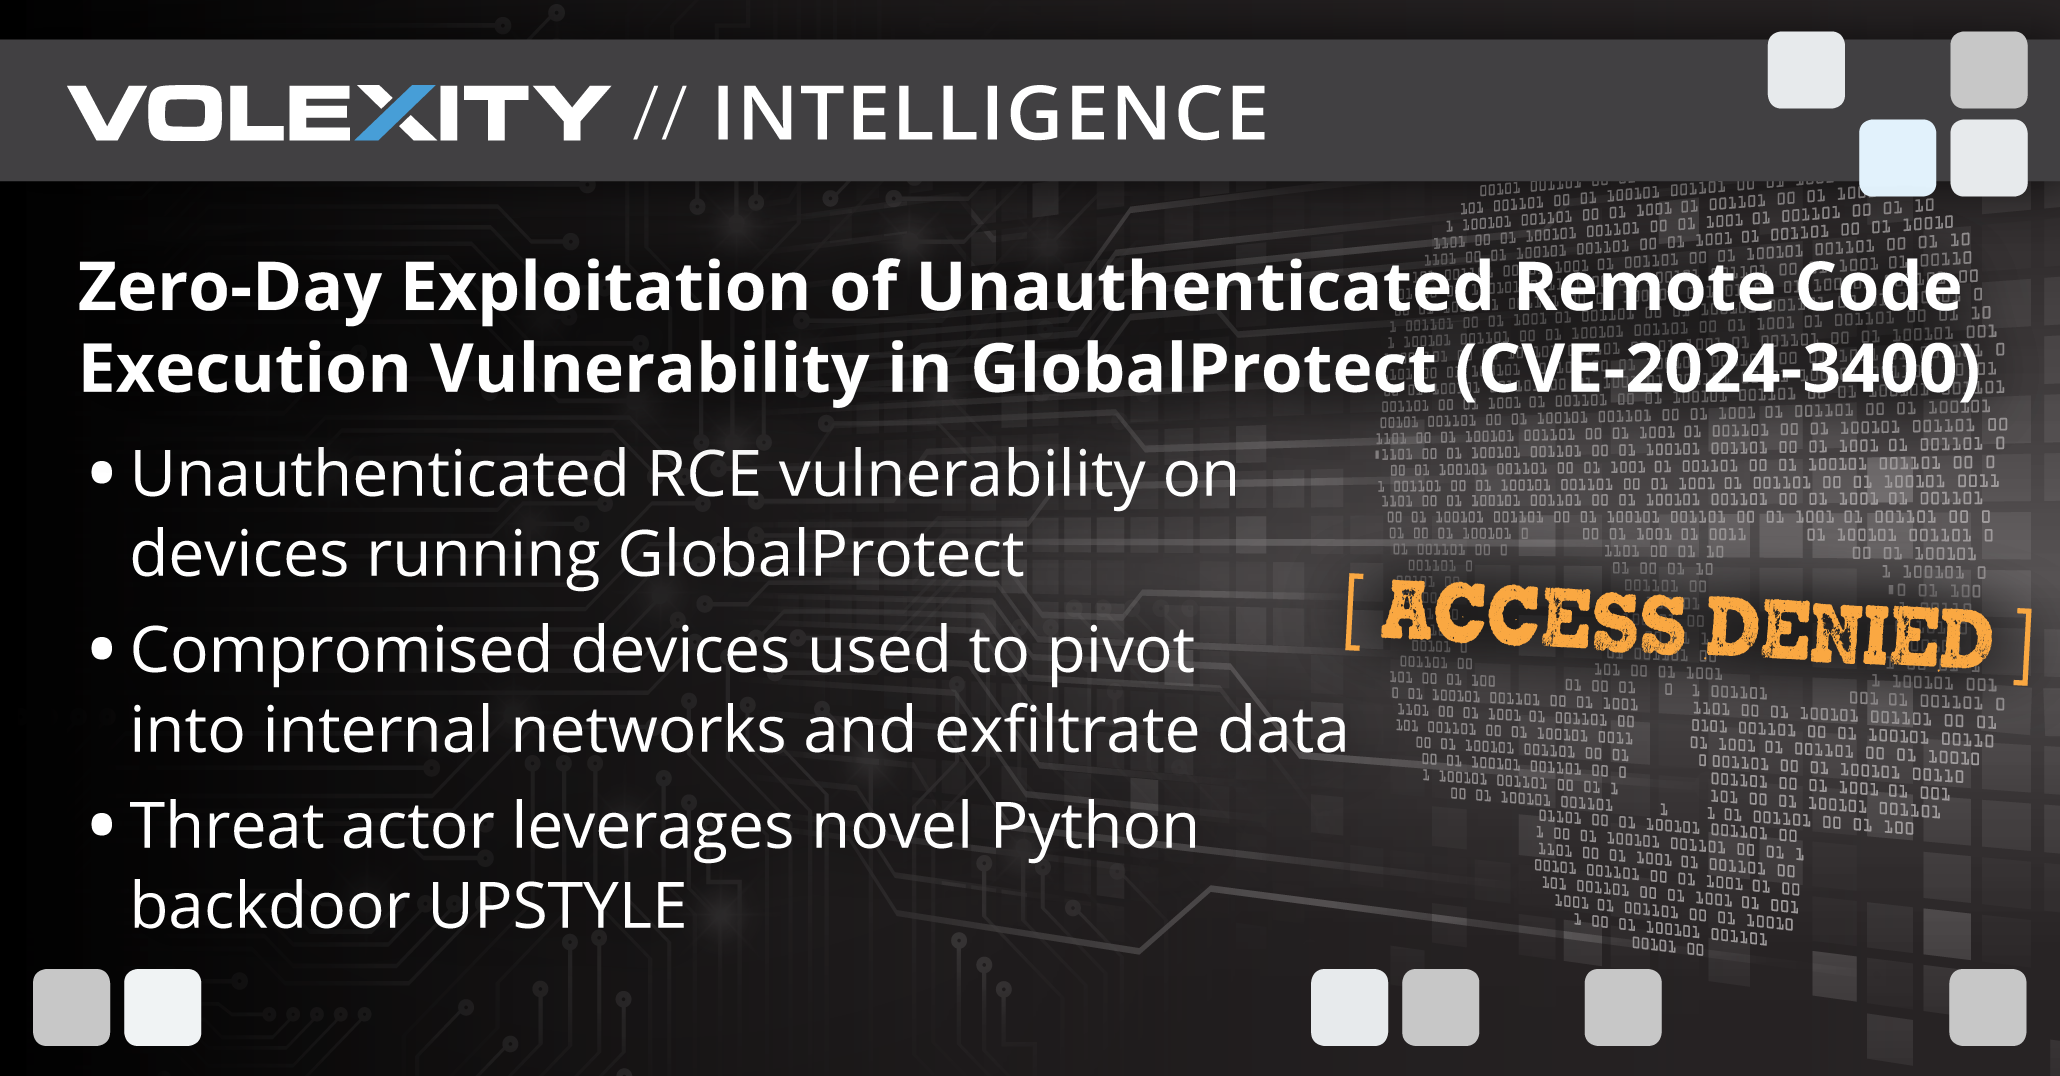 Volexity-Blog-zero-day-exploitation-of-unauthenticated-remote-code-execution-vulnerability-in-globalprotect-cve-2024-3400